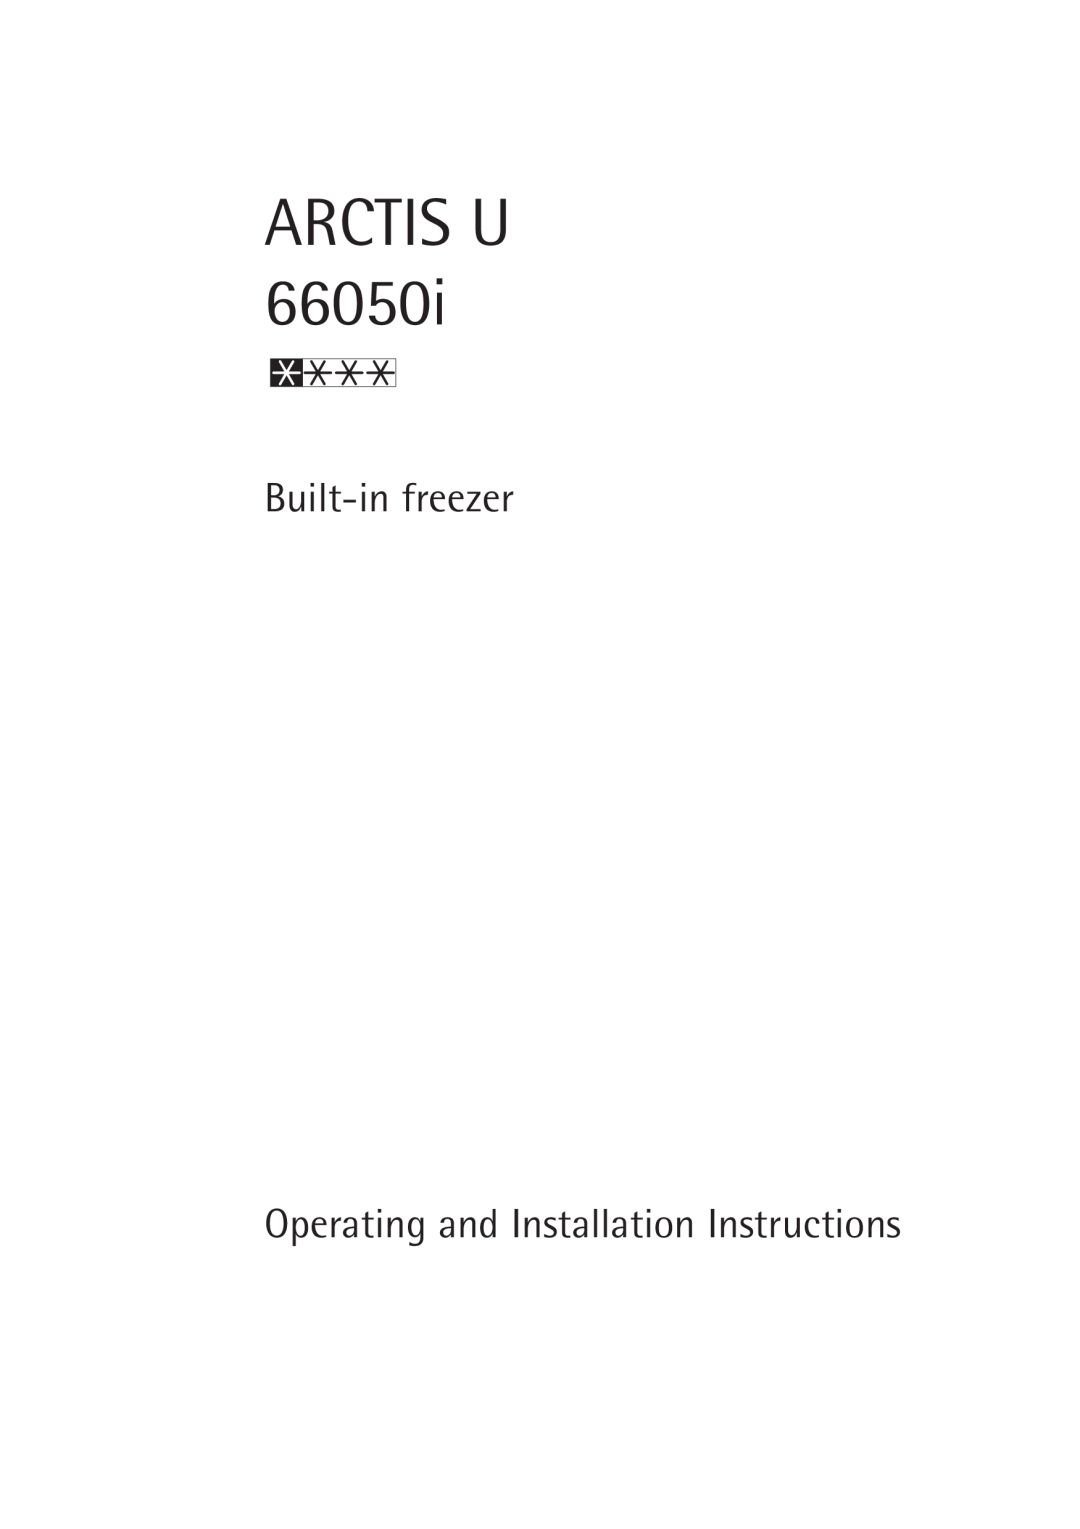 Electrolux 66050i installation instructions Arctis U, Built-in freezer, Operating and Installation Instructions 